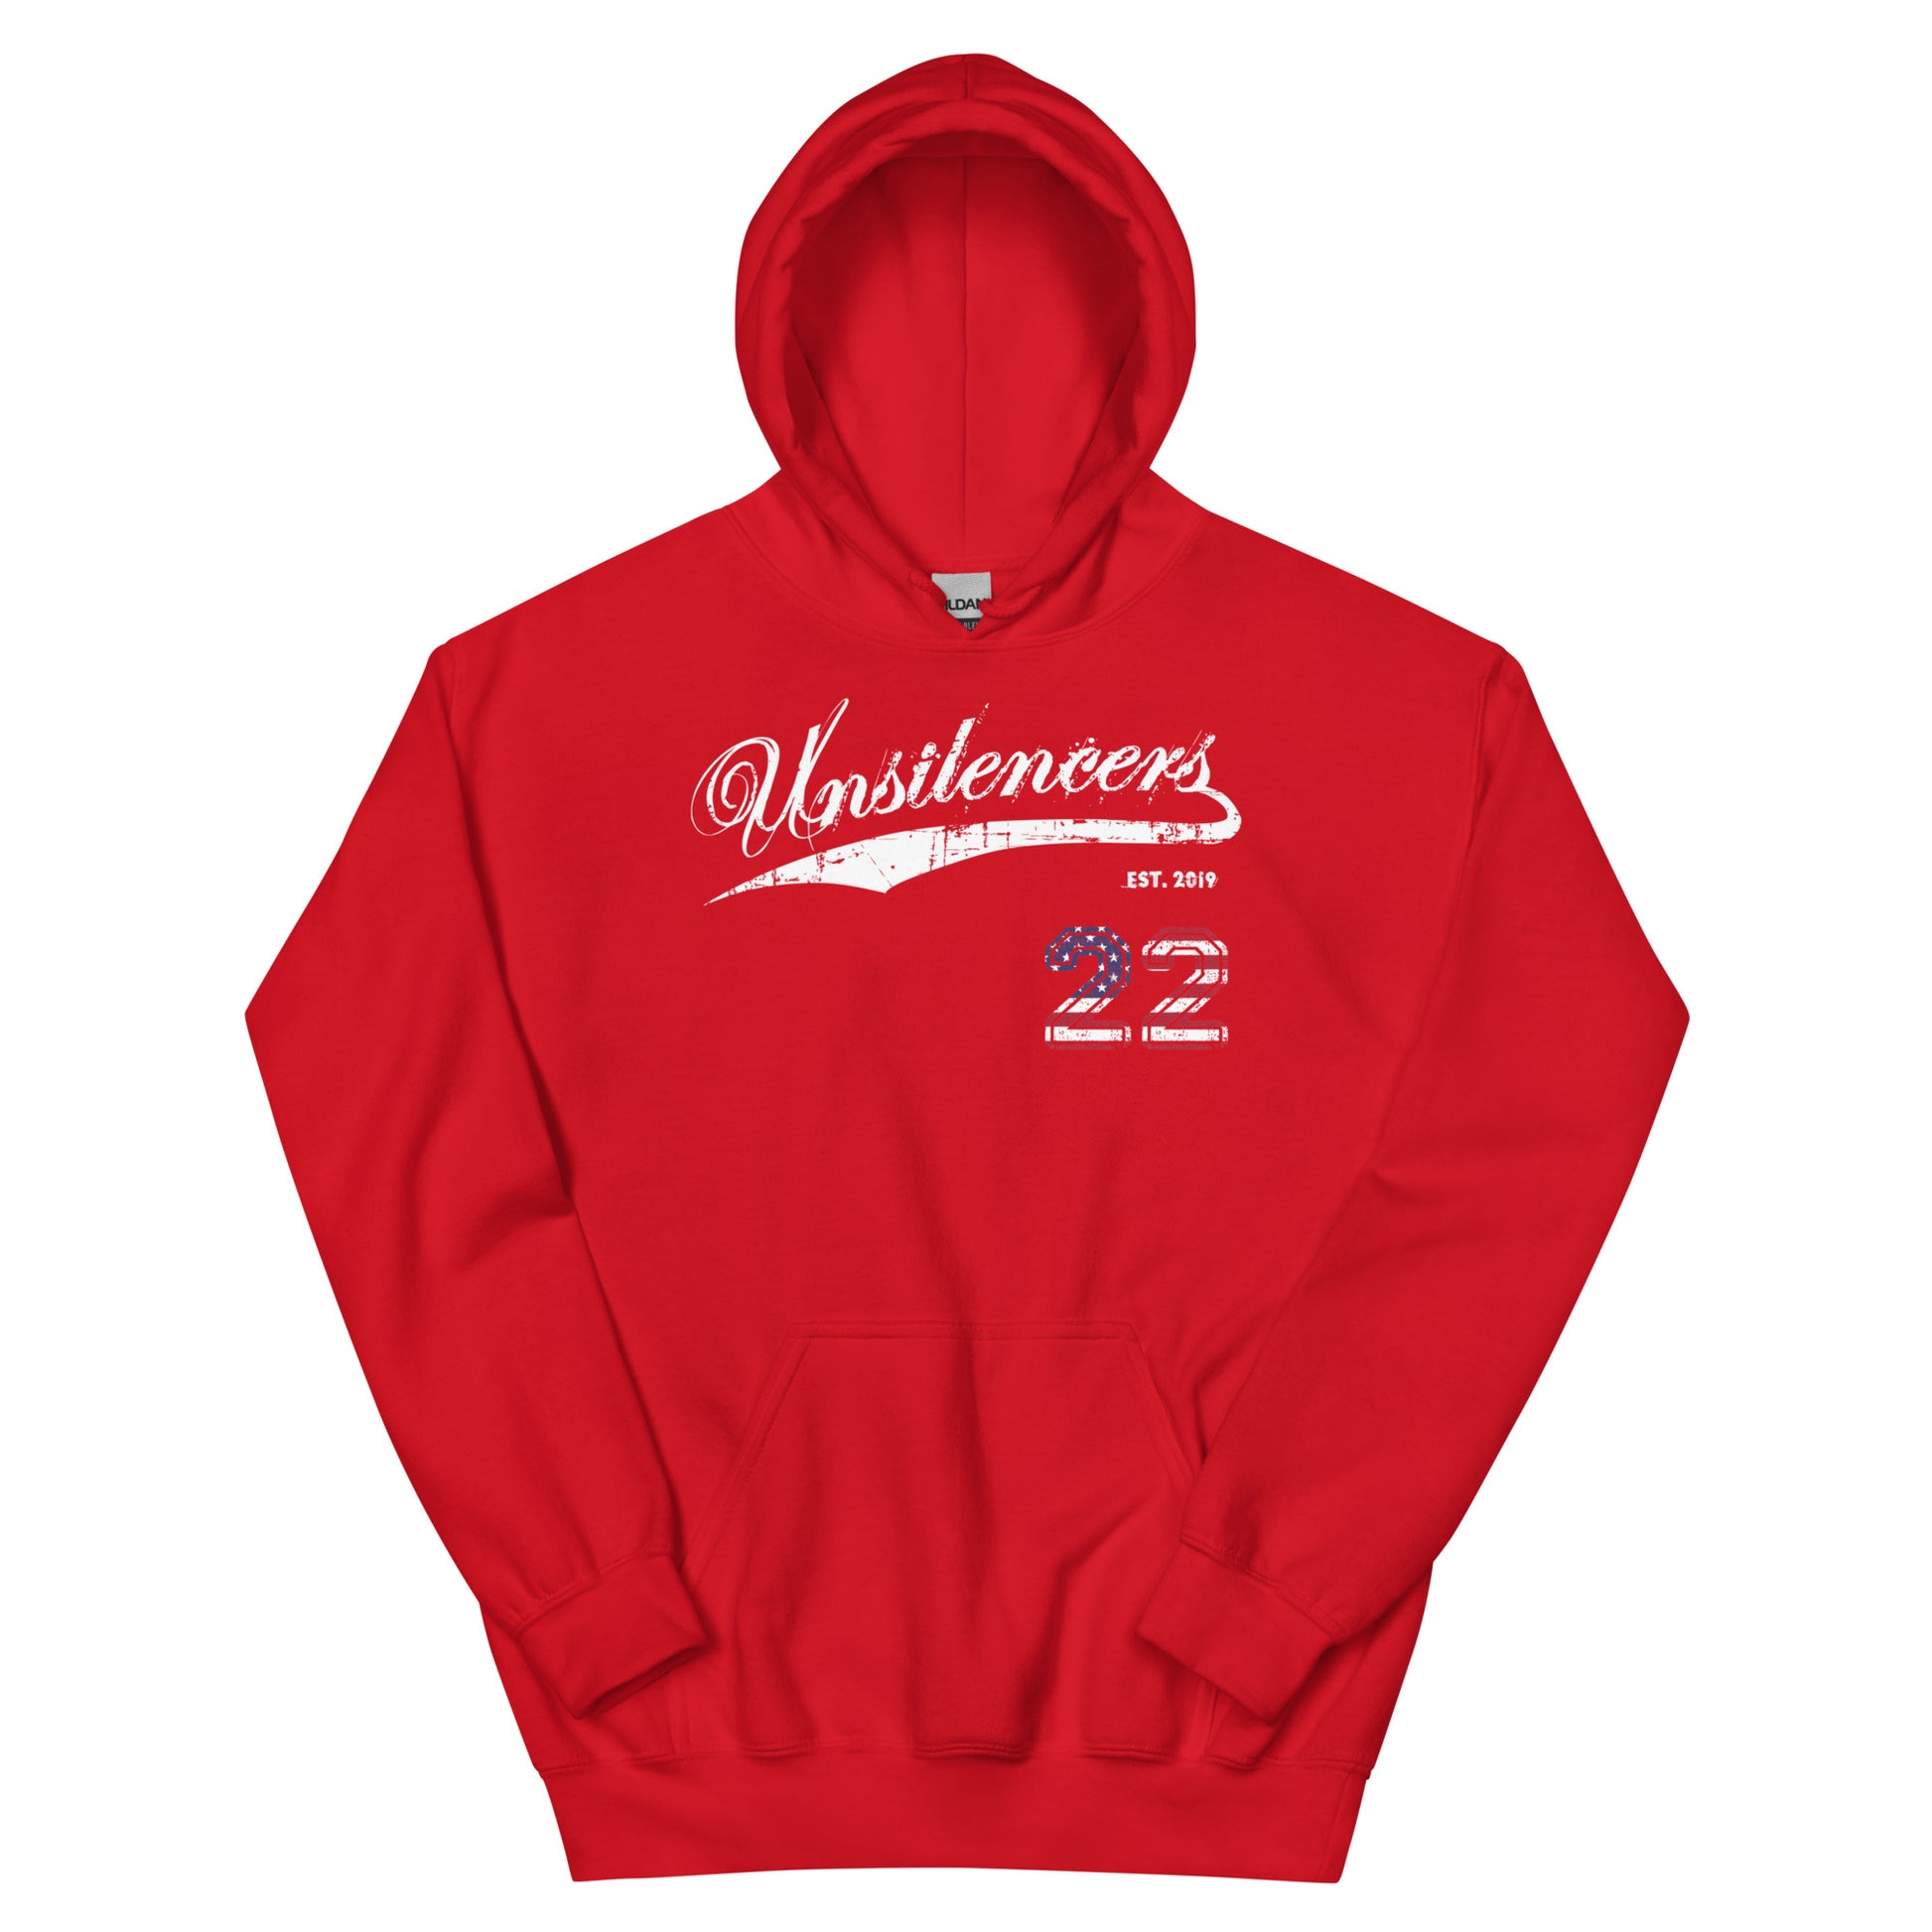 ENDING 22 Unsilencers Hoodie Red Front